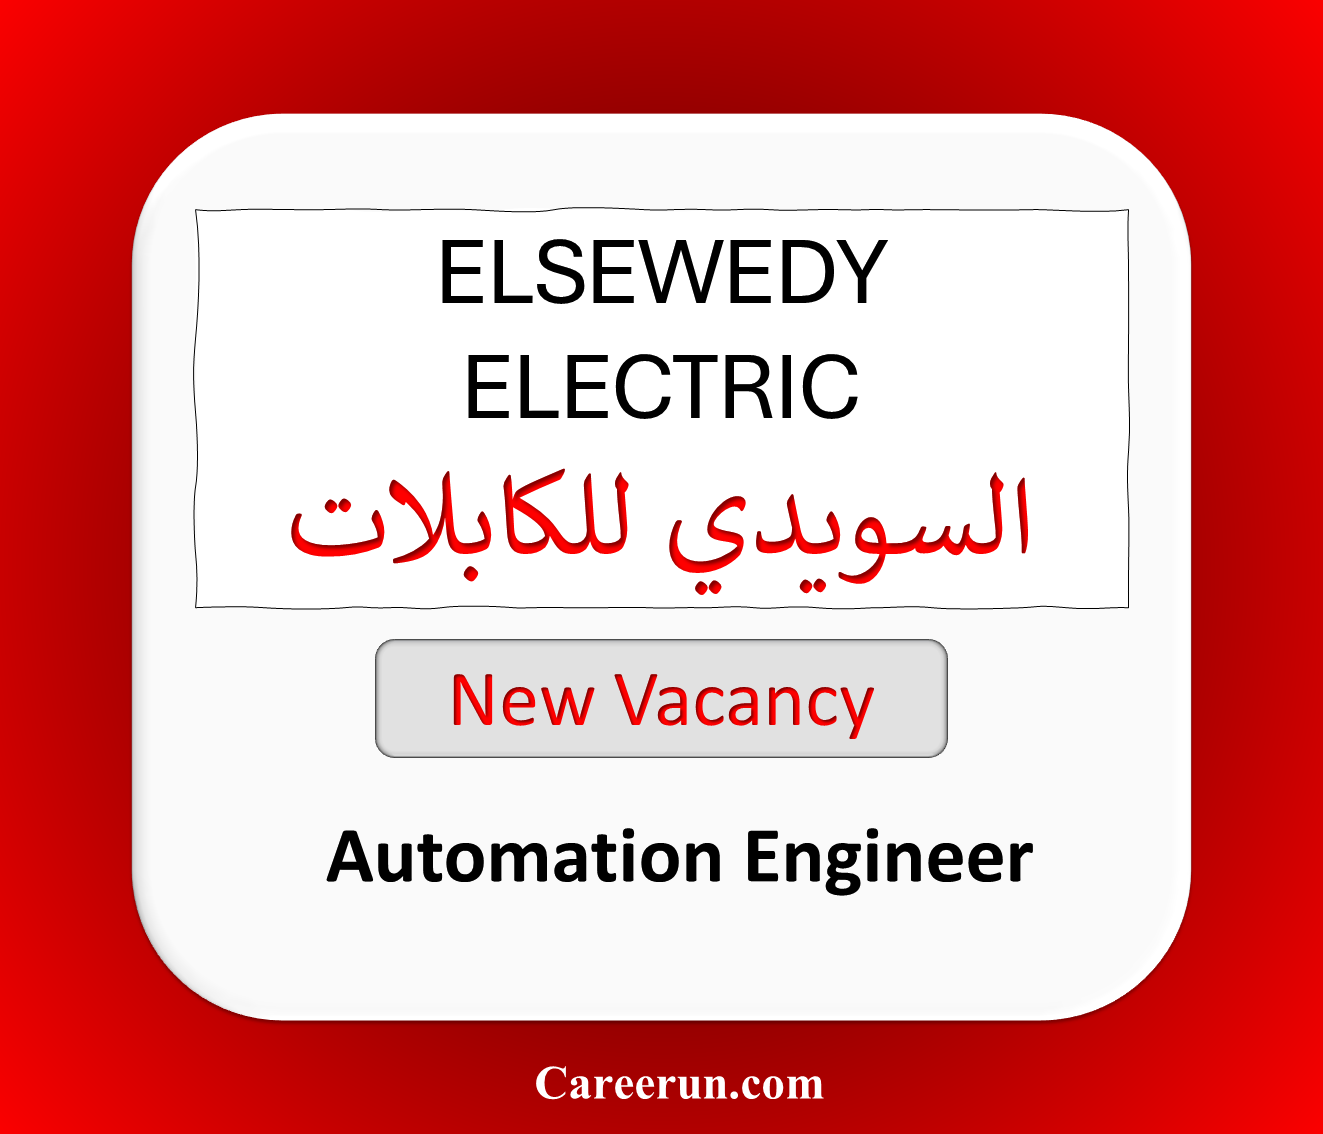 Automation Engineer at ELSEWEDY ELECTRIC